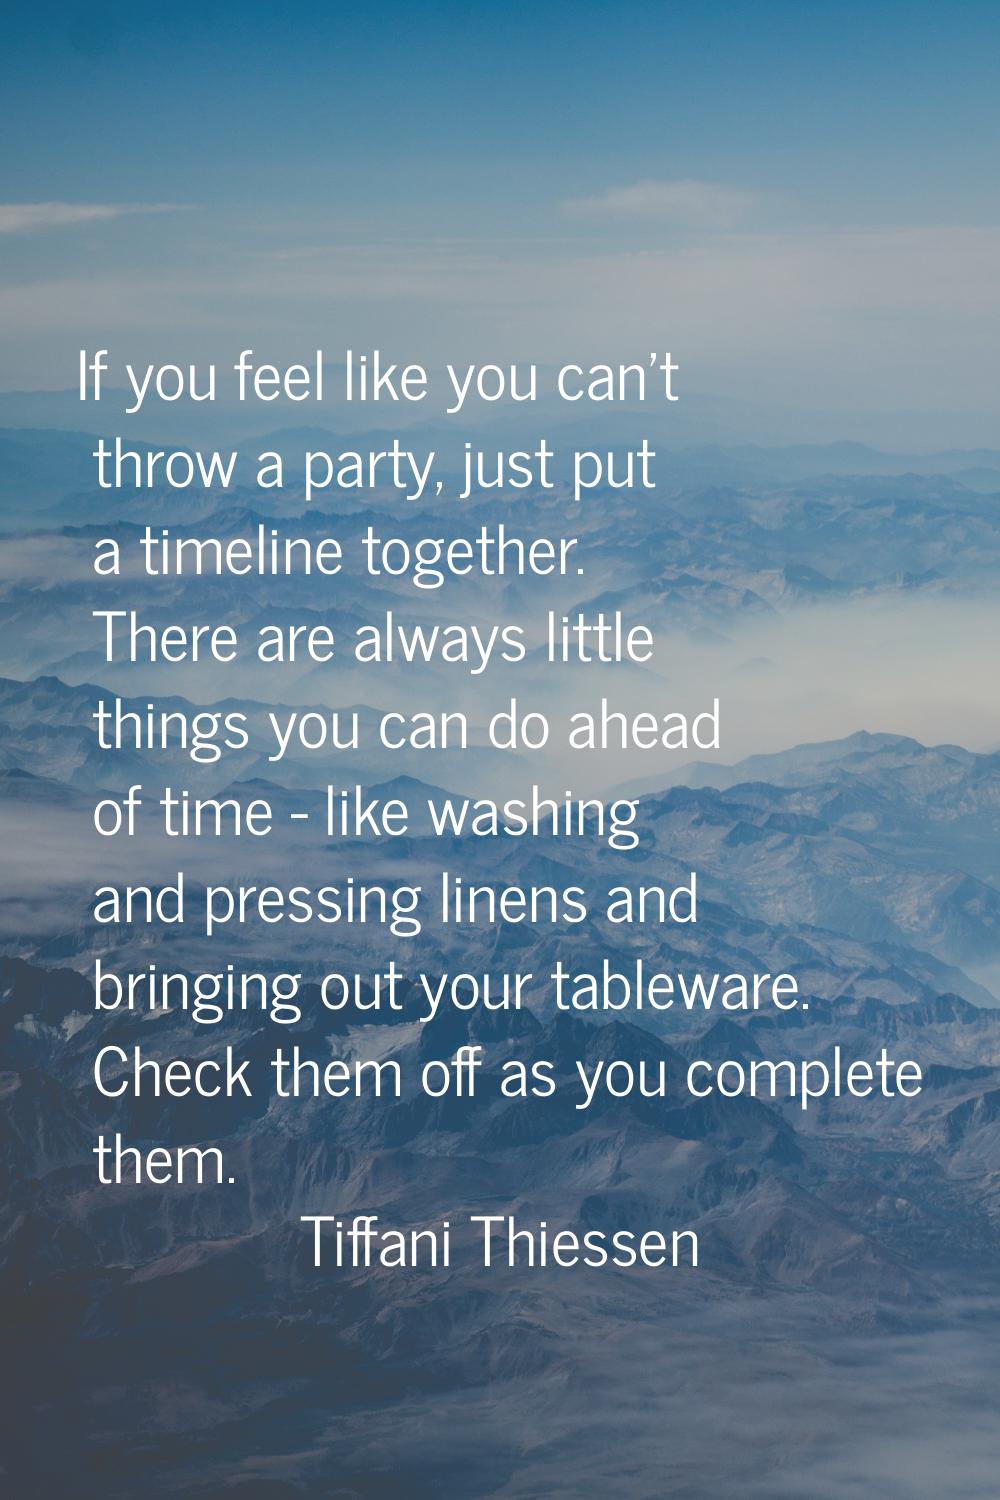 If you feel like you can't throw a party, just put a timeline together. There are always little thi